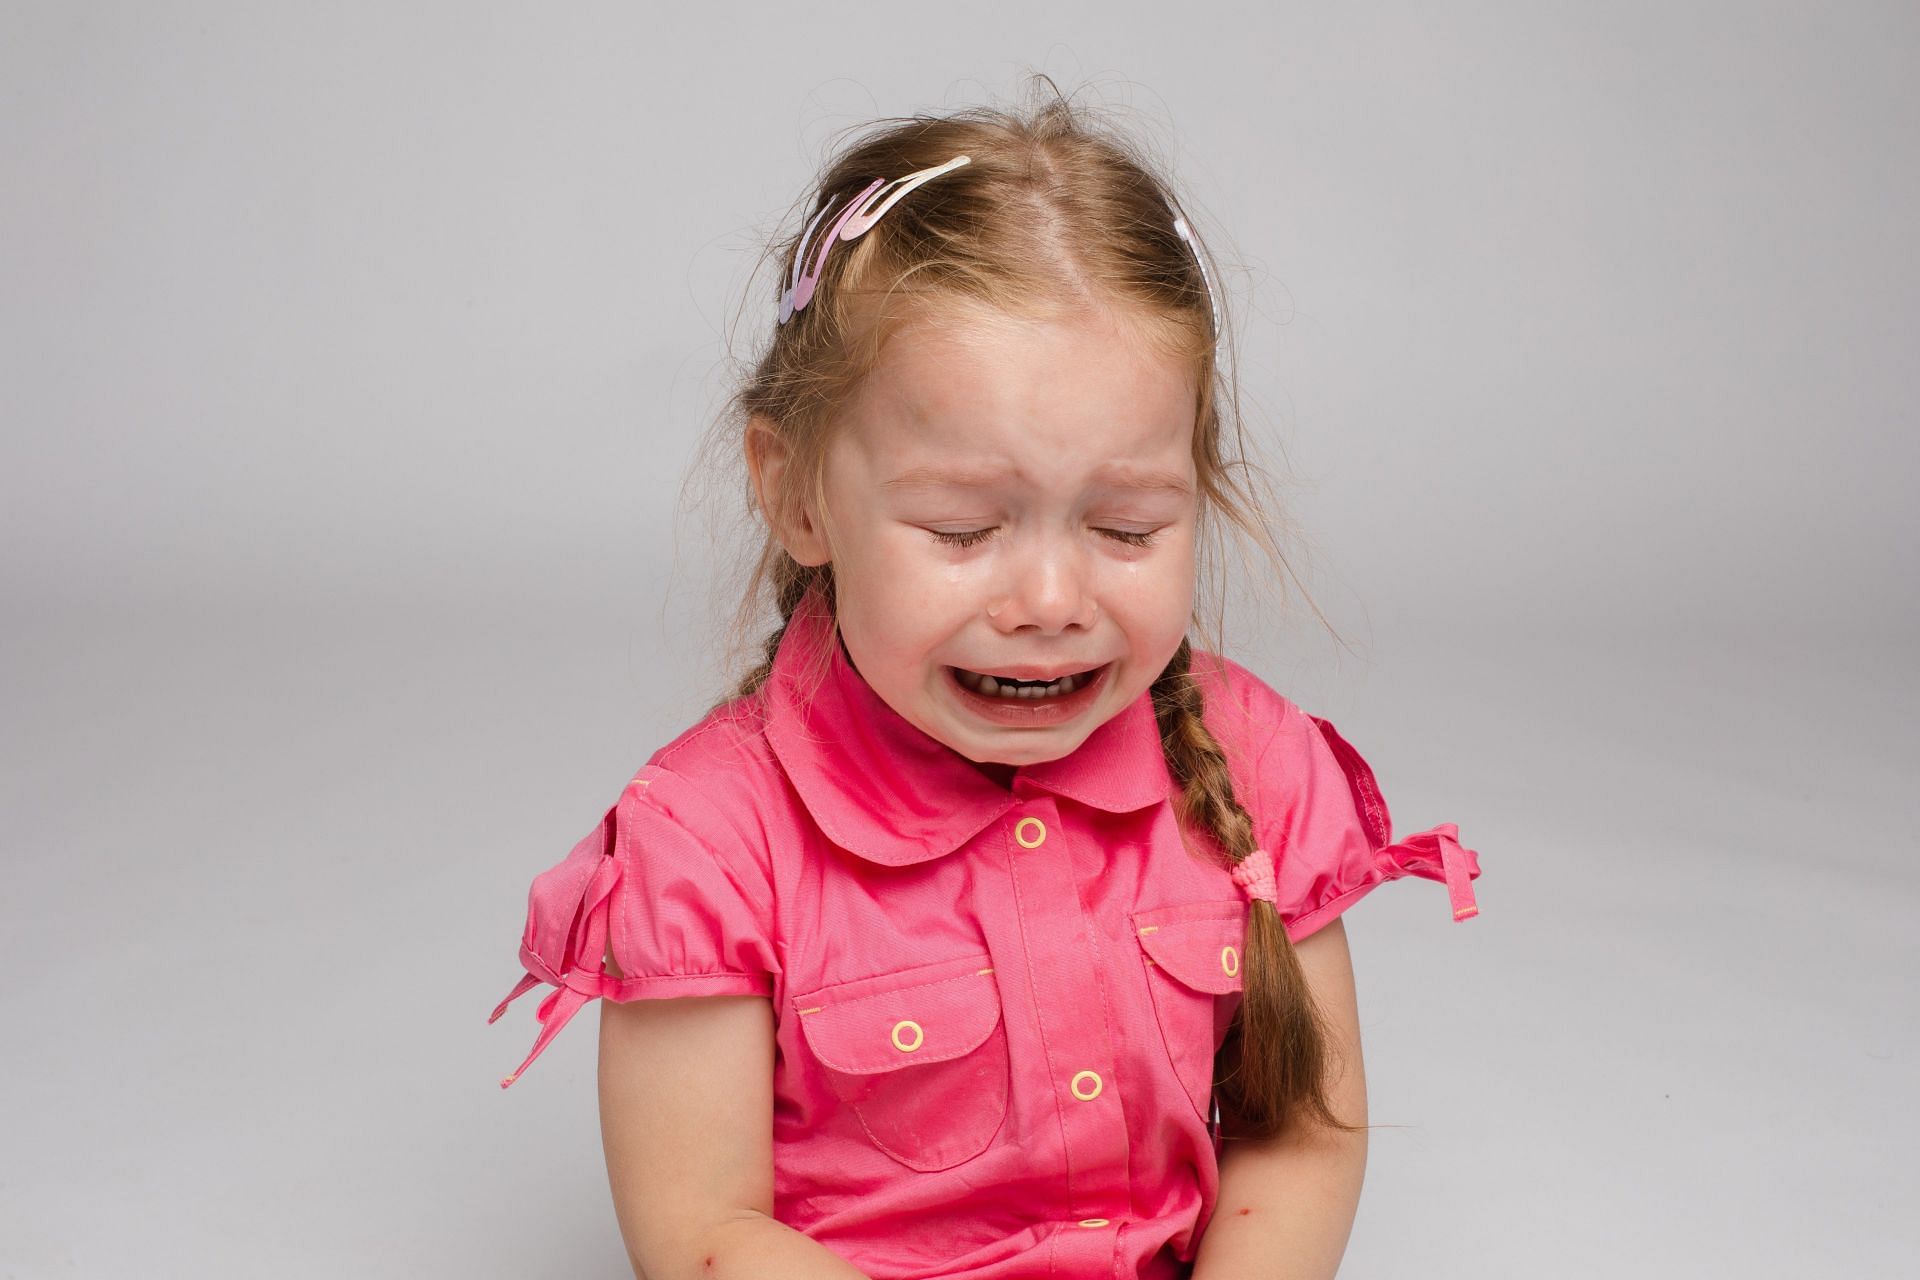 Even though it sounds difficult, children with this condition can learn to regulate their emotions and behaviors. (Image via Freepik/Freepik)